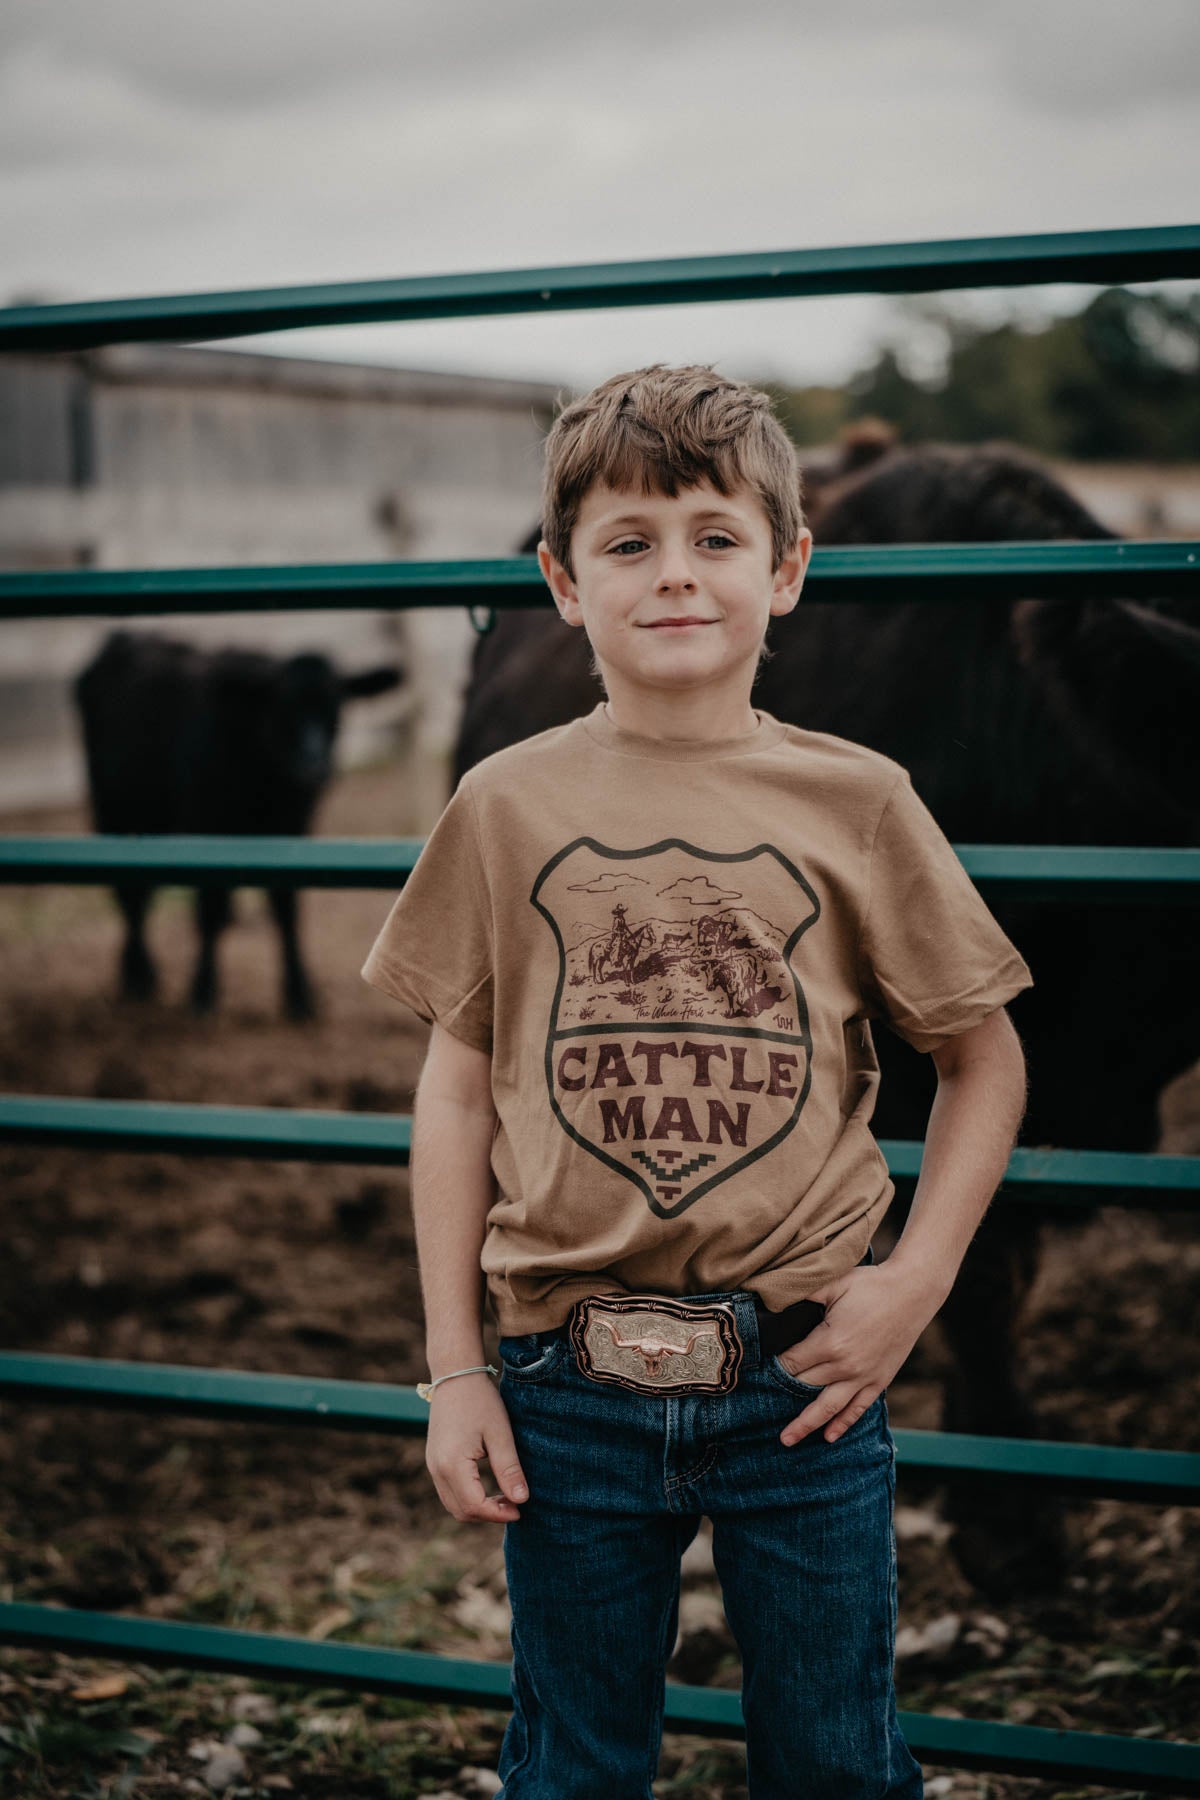 'Cattleman' Kids Brown Graphic T-shirt (2T to Youth M)